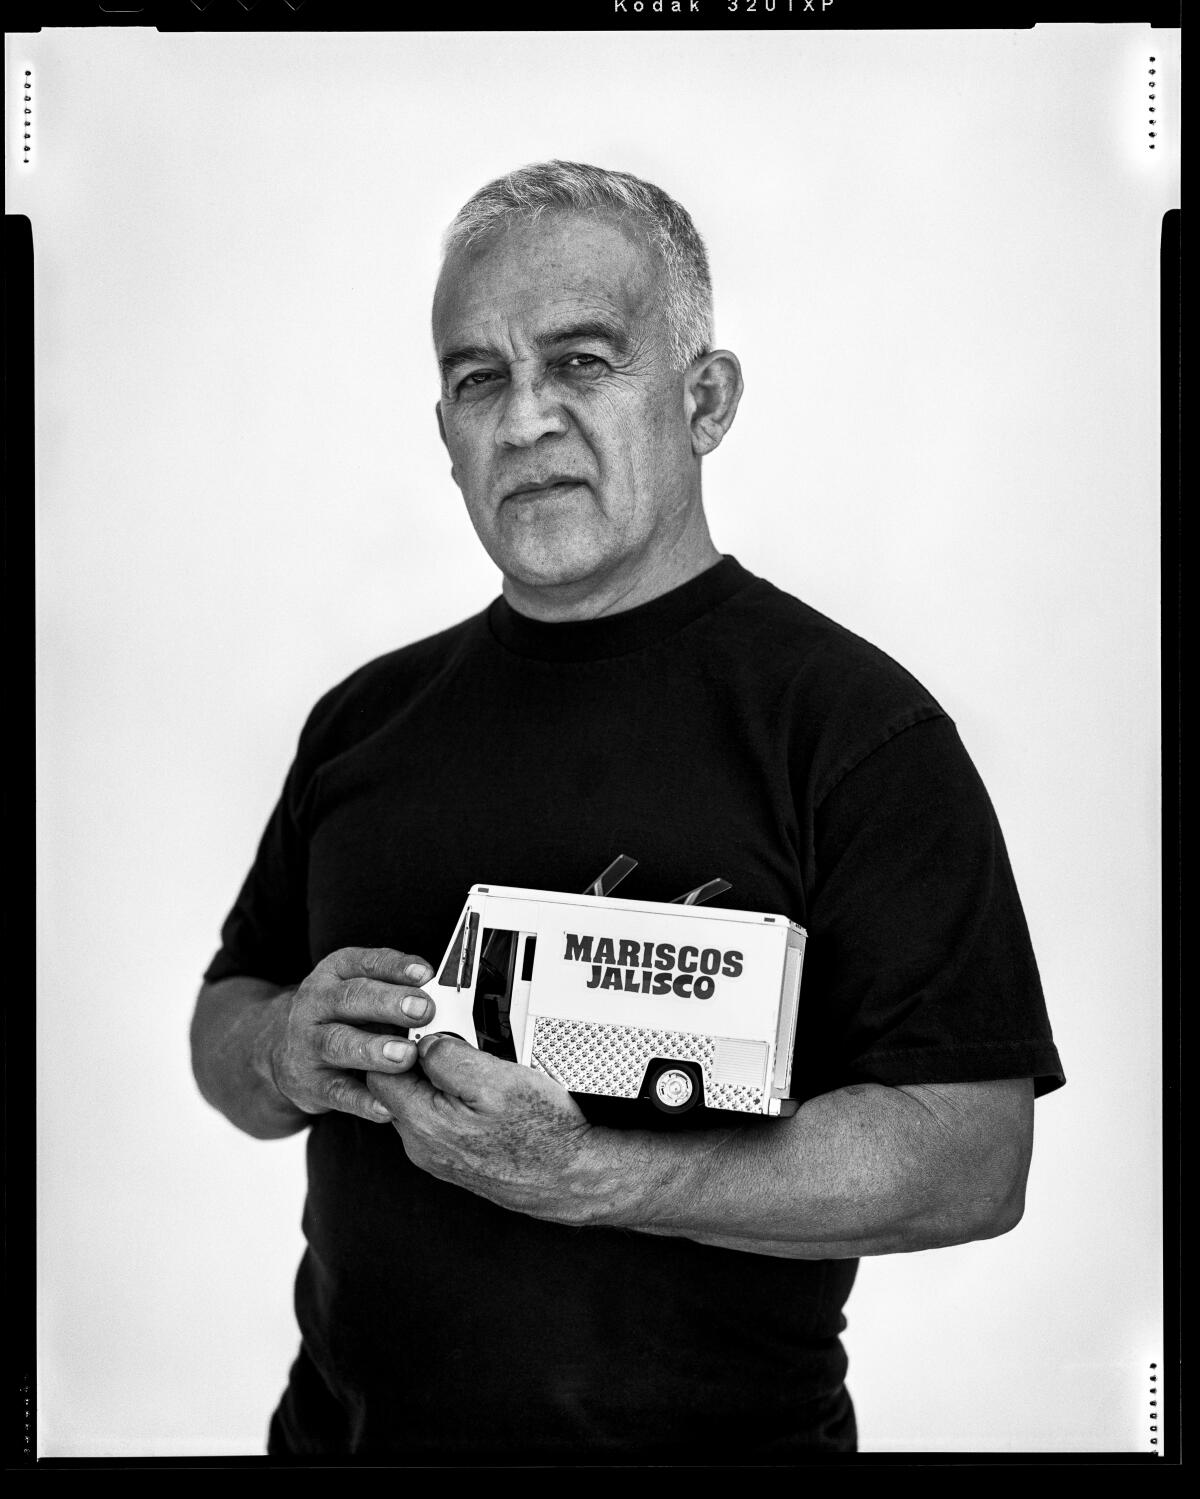 Black and white film photo of a man, Raul Ortega, holding a model Mariscos Jalisco food truck